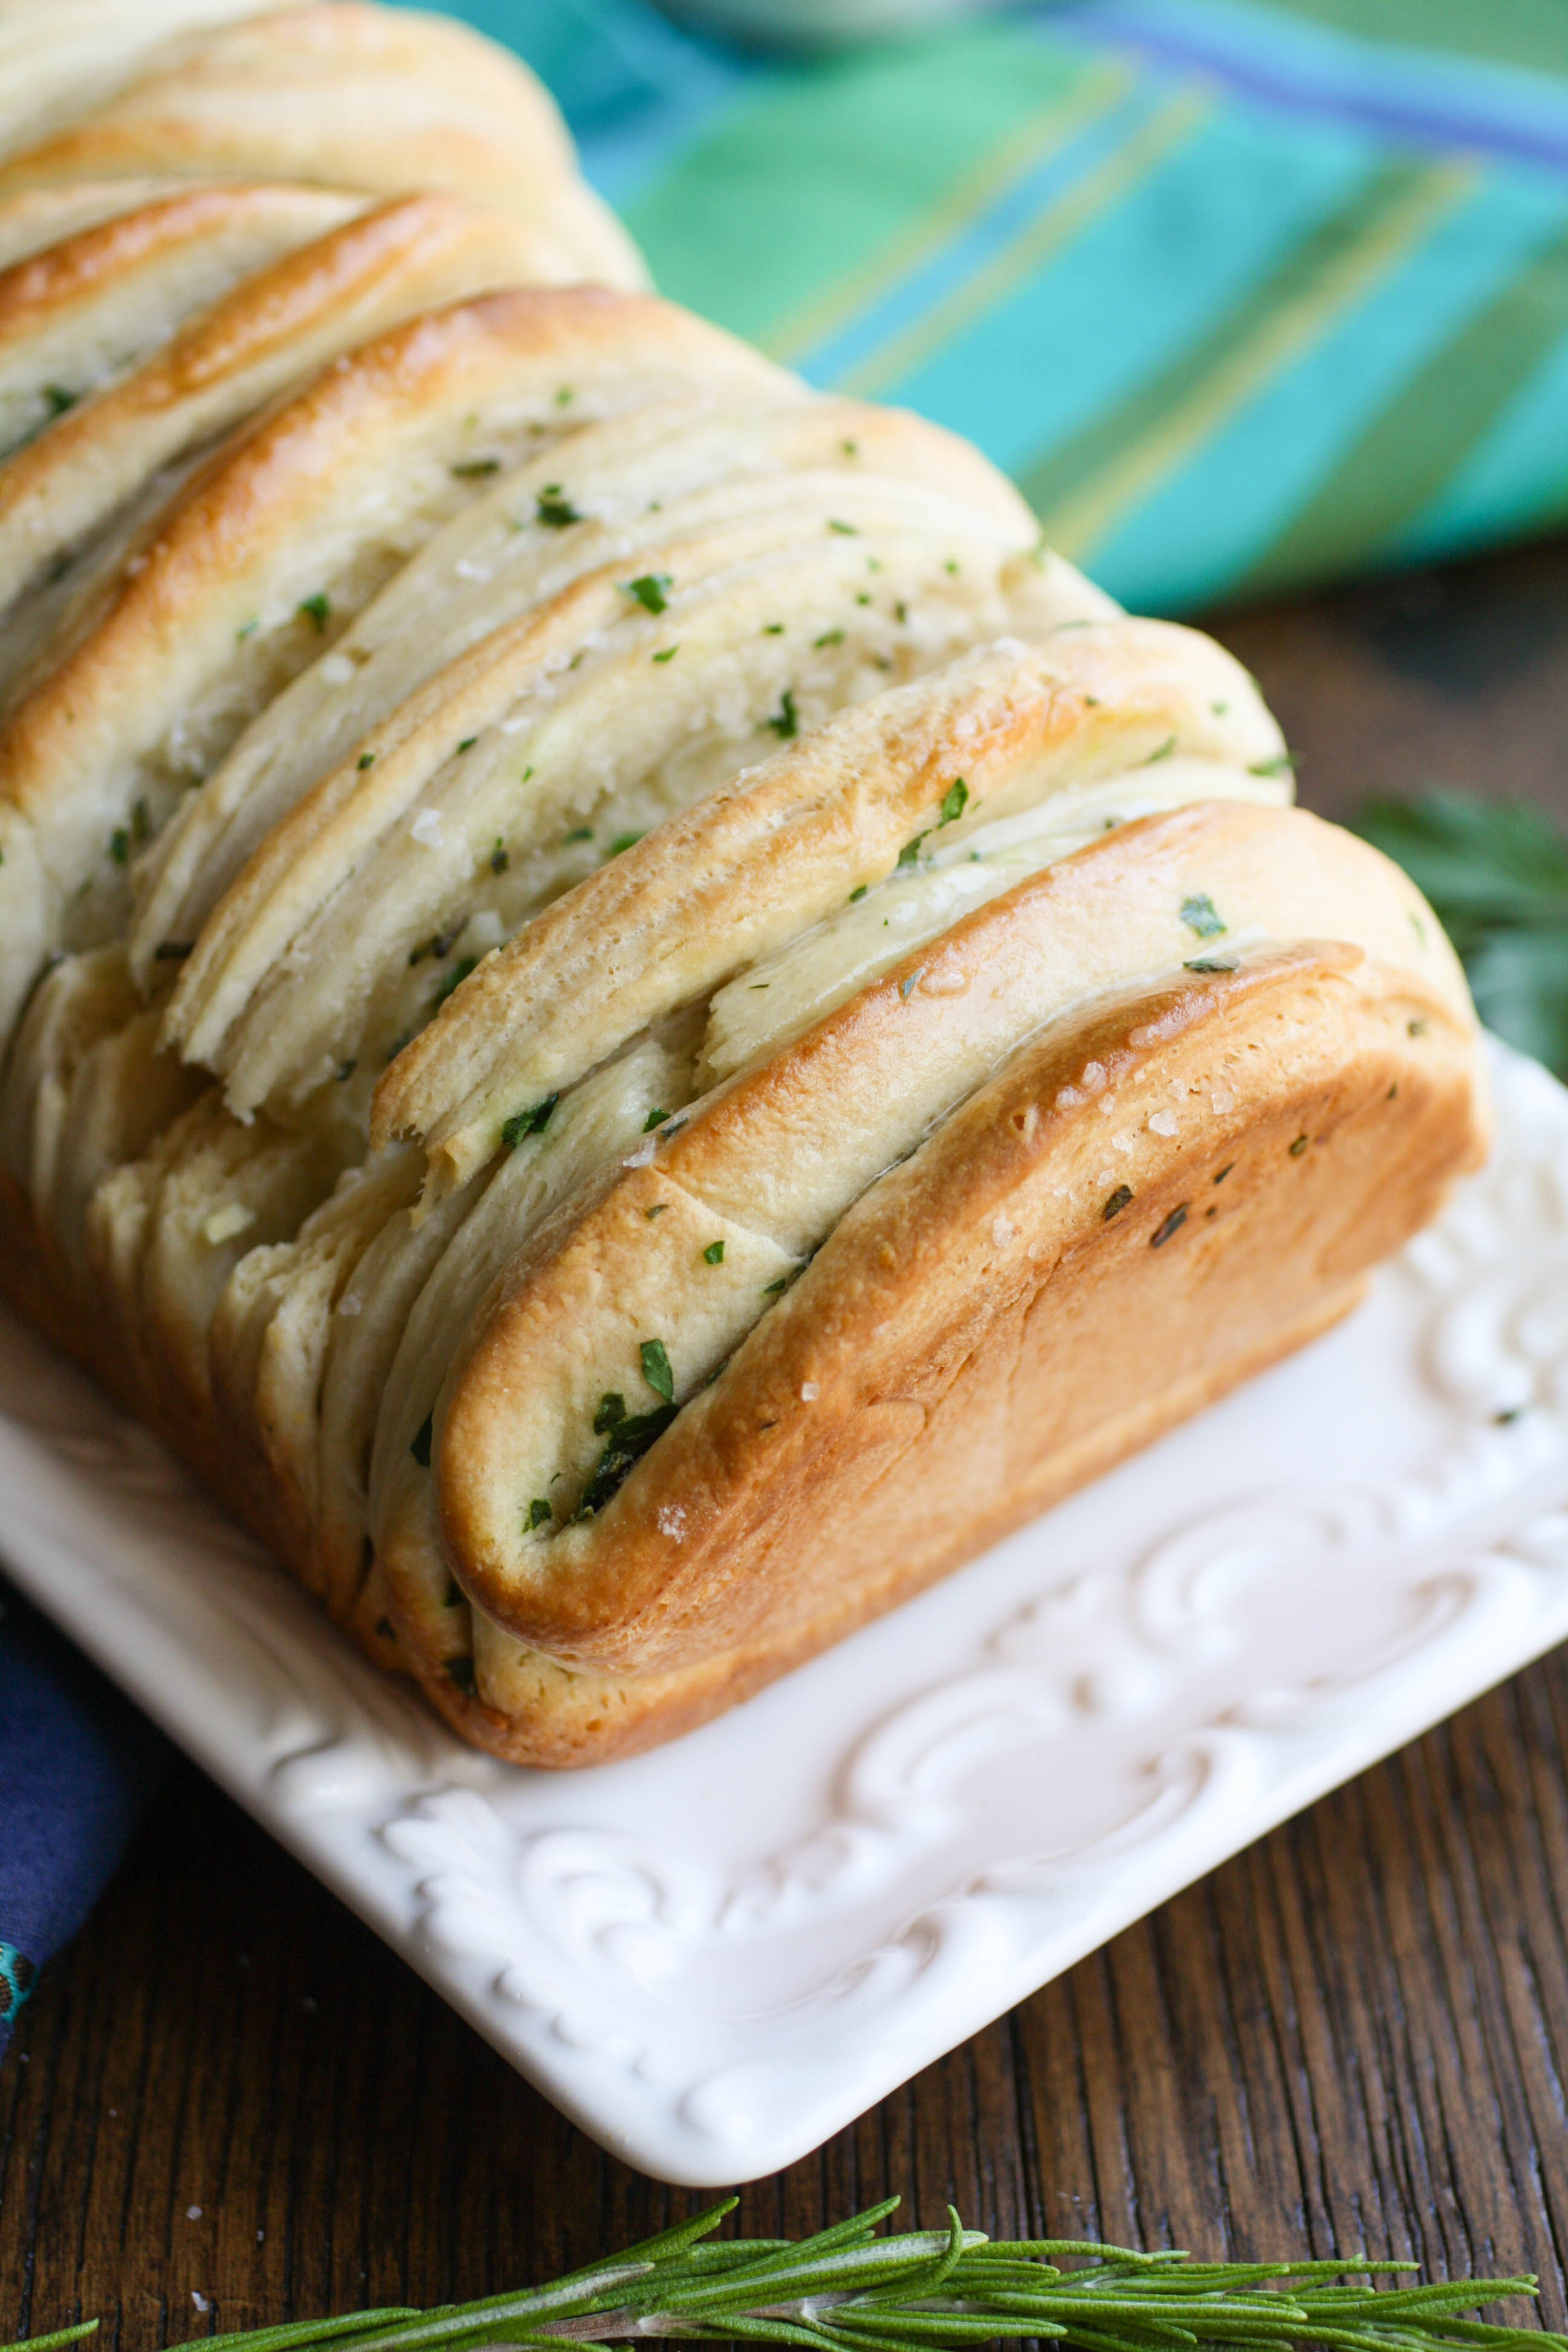 Garlic & Herb Pull Apart Bread is a great treat for any meal. Everyone will love how fun and flavorful it is!